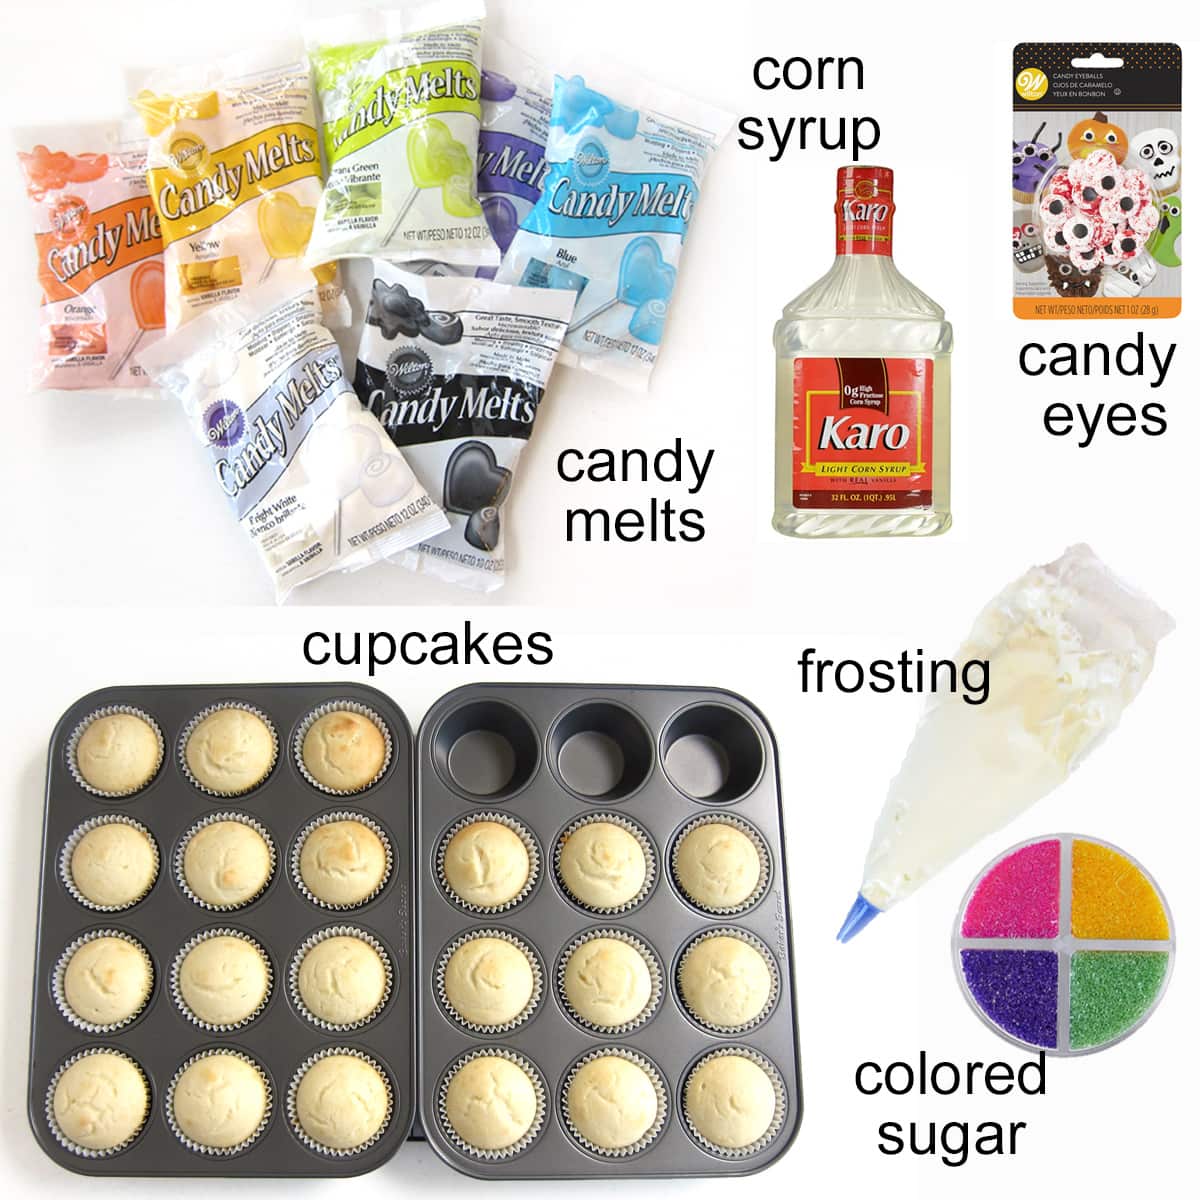 monster cupcakes ingredients including baked cupcakes, candy melts, corn syrup, frosting, colored sugar, and candy eyes.